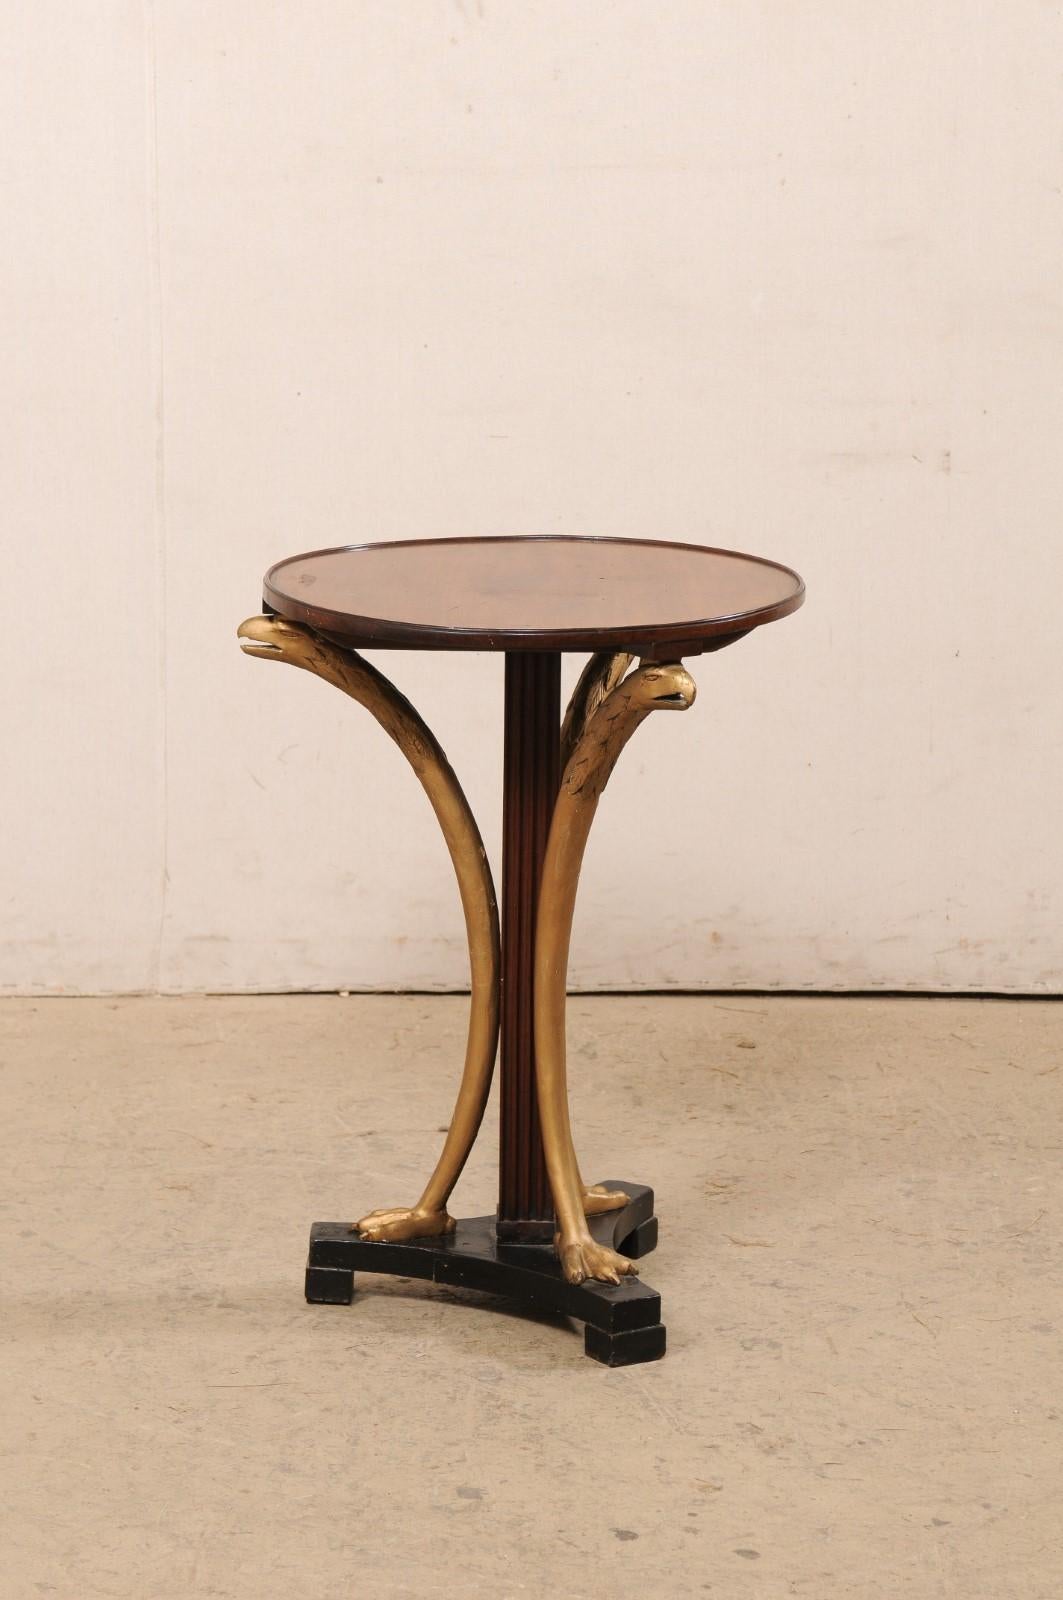 An Italian round side table with eagle accents from the 19th century. This antique gueridon table from Italy has a round-shaped top with a thin, raised lip along its edge, which is supported on a squared and fluted column, and raised on a black